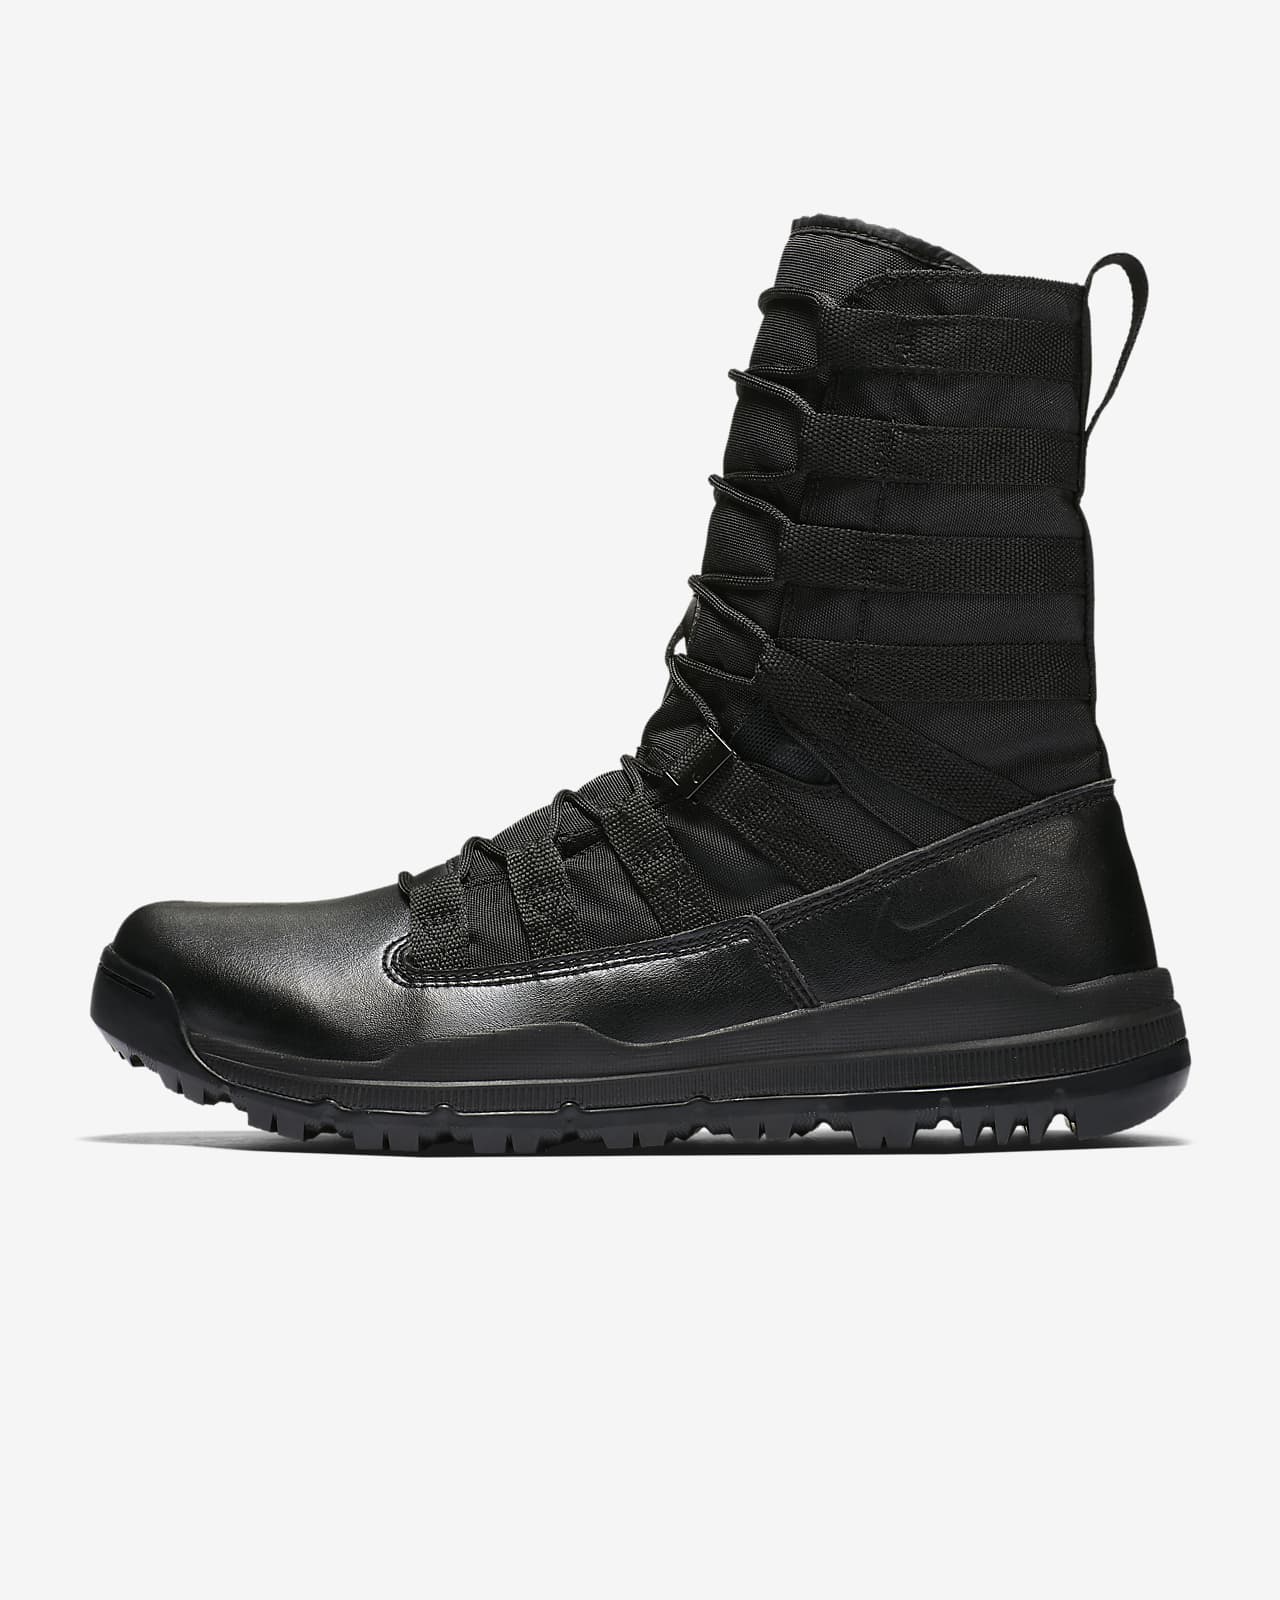 army nike shoes